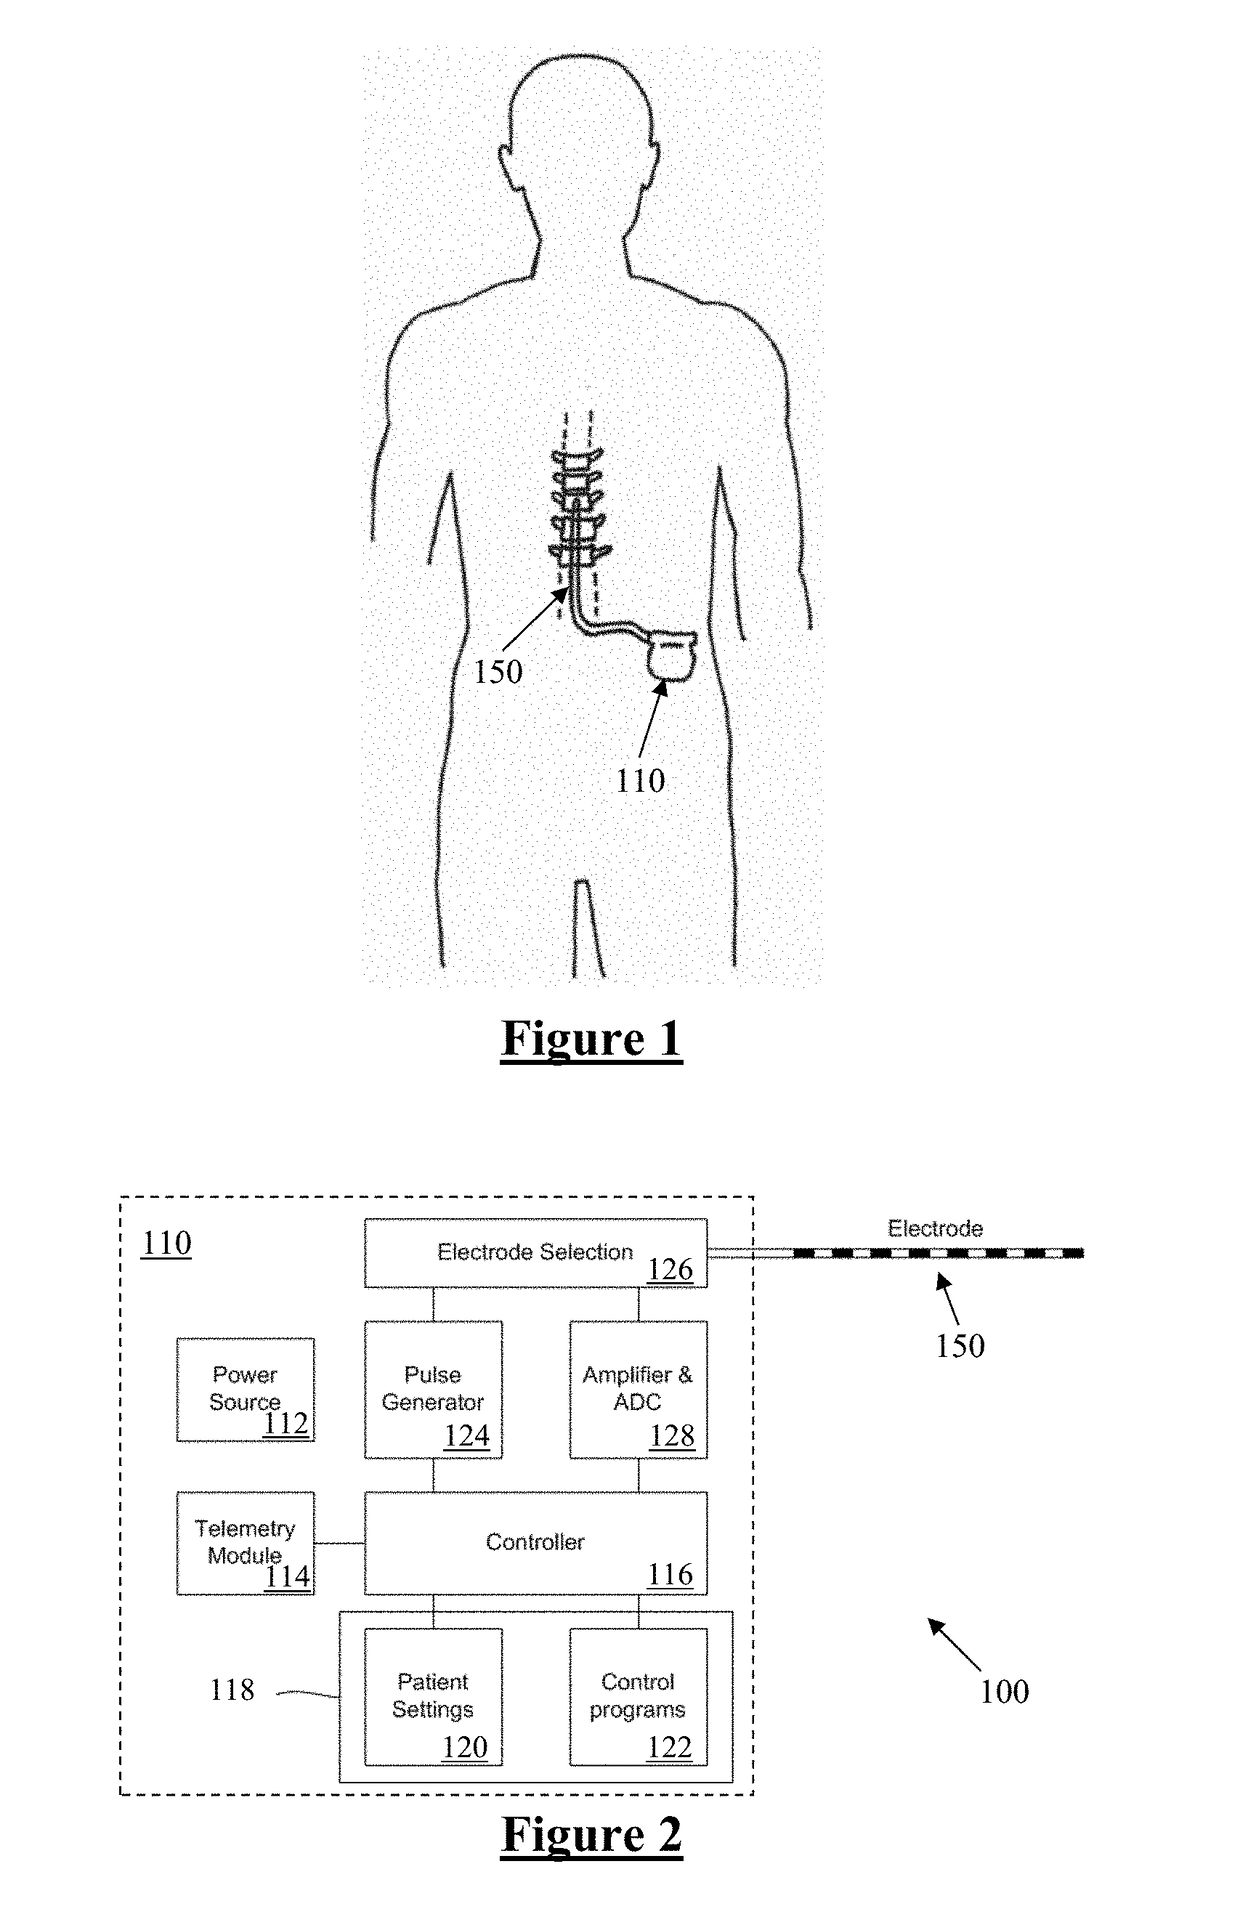 Method and Device for Feedback Control of Neural Stimulation